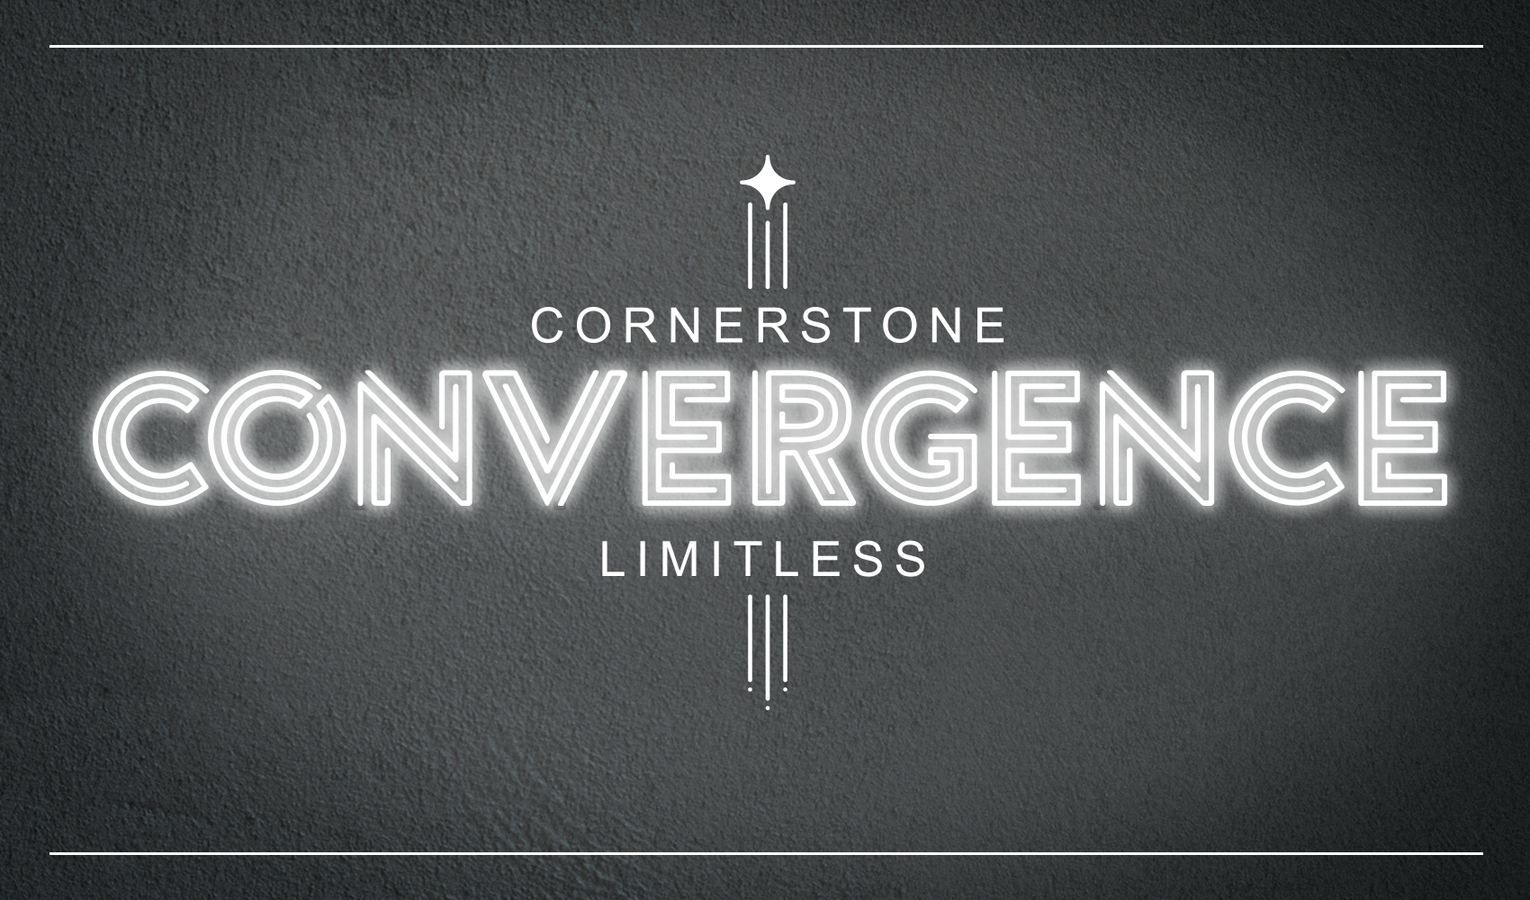 Countdown to Cornerstone Convergence: Customize your limitless experience